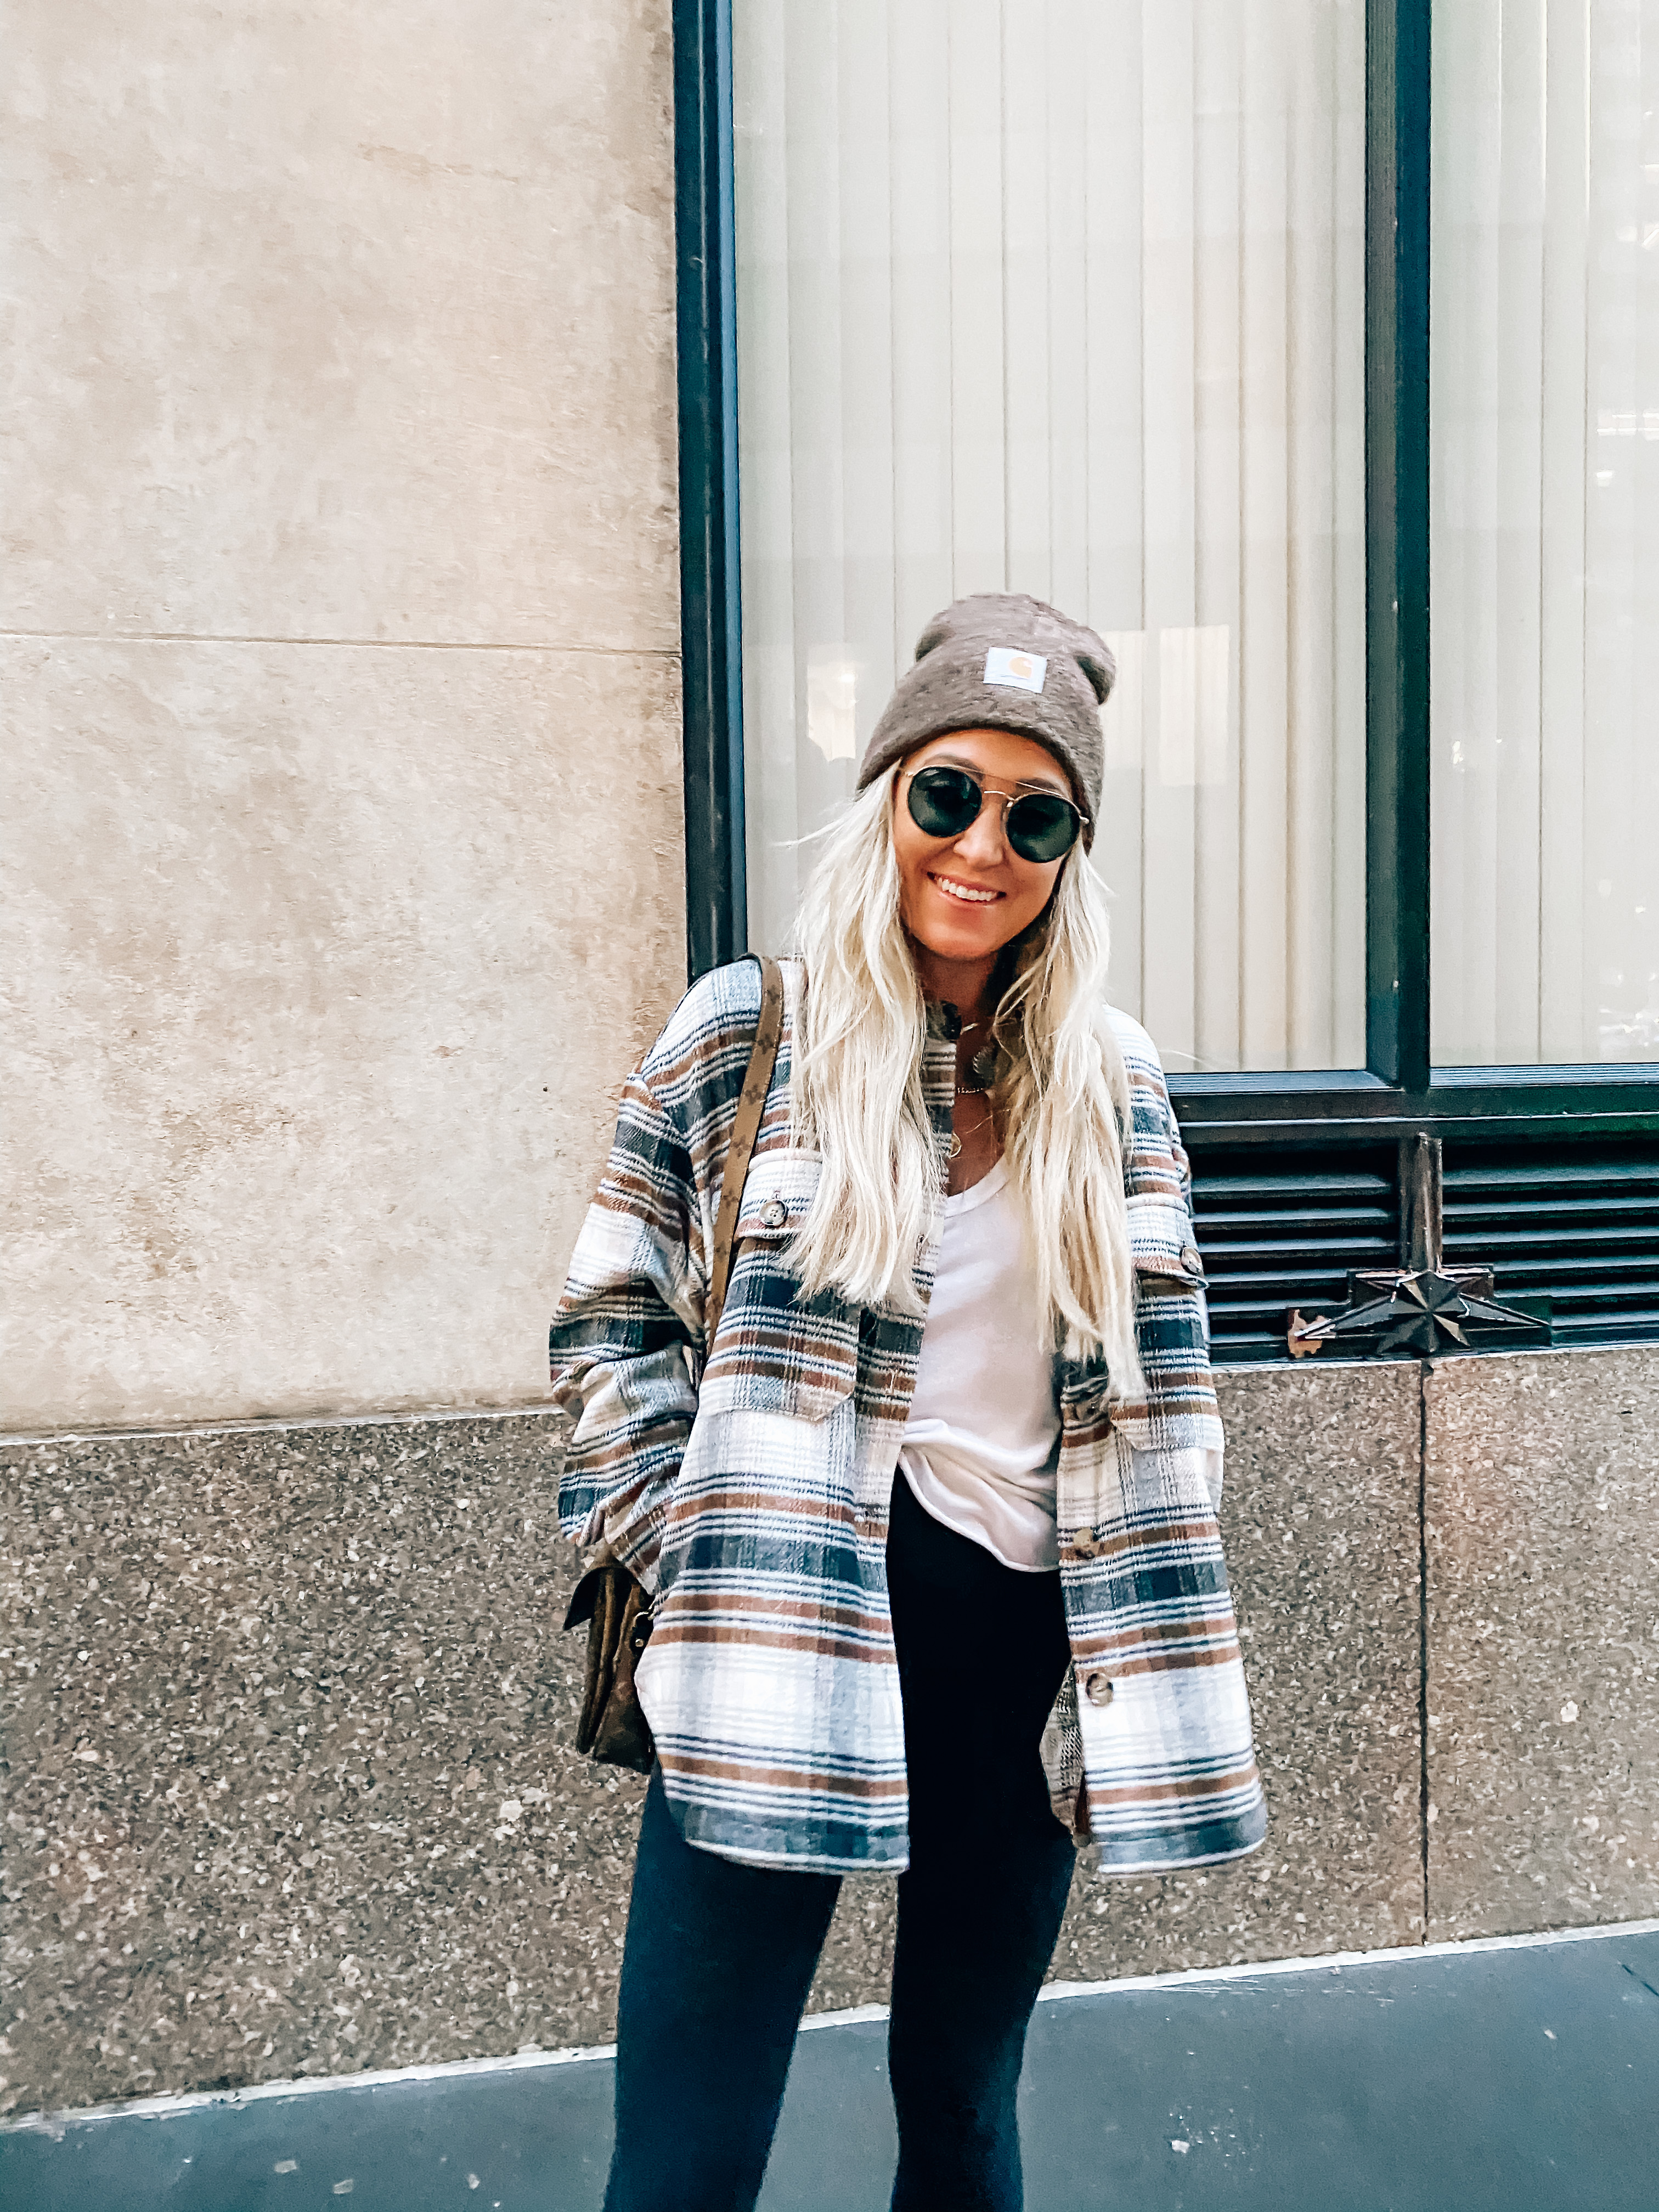 THE BIGGEST FALL TREND: PLAID SHACKETS - Torey's Treasures